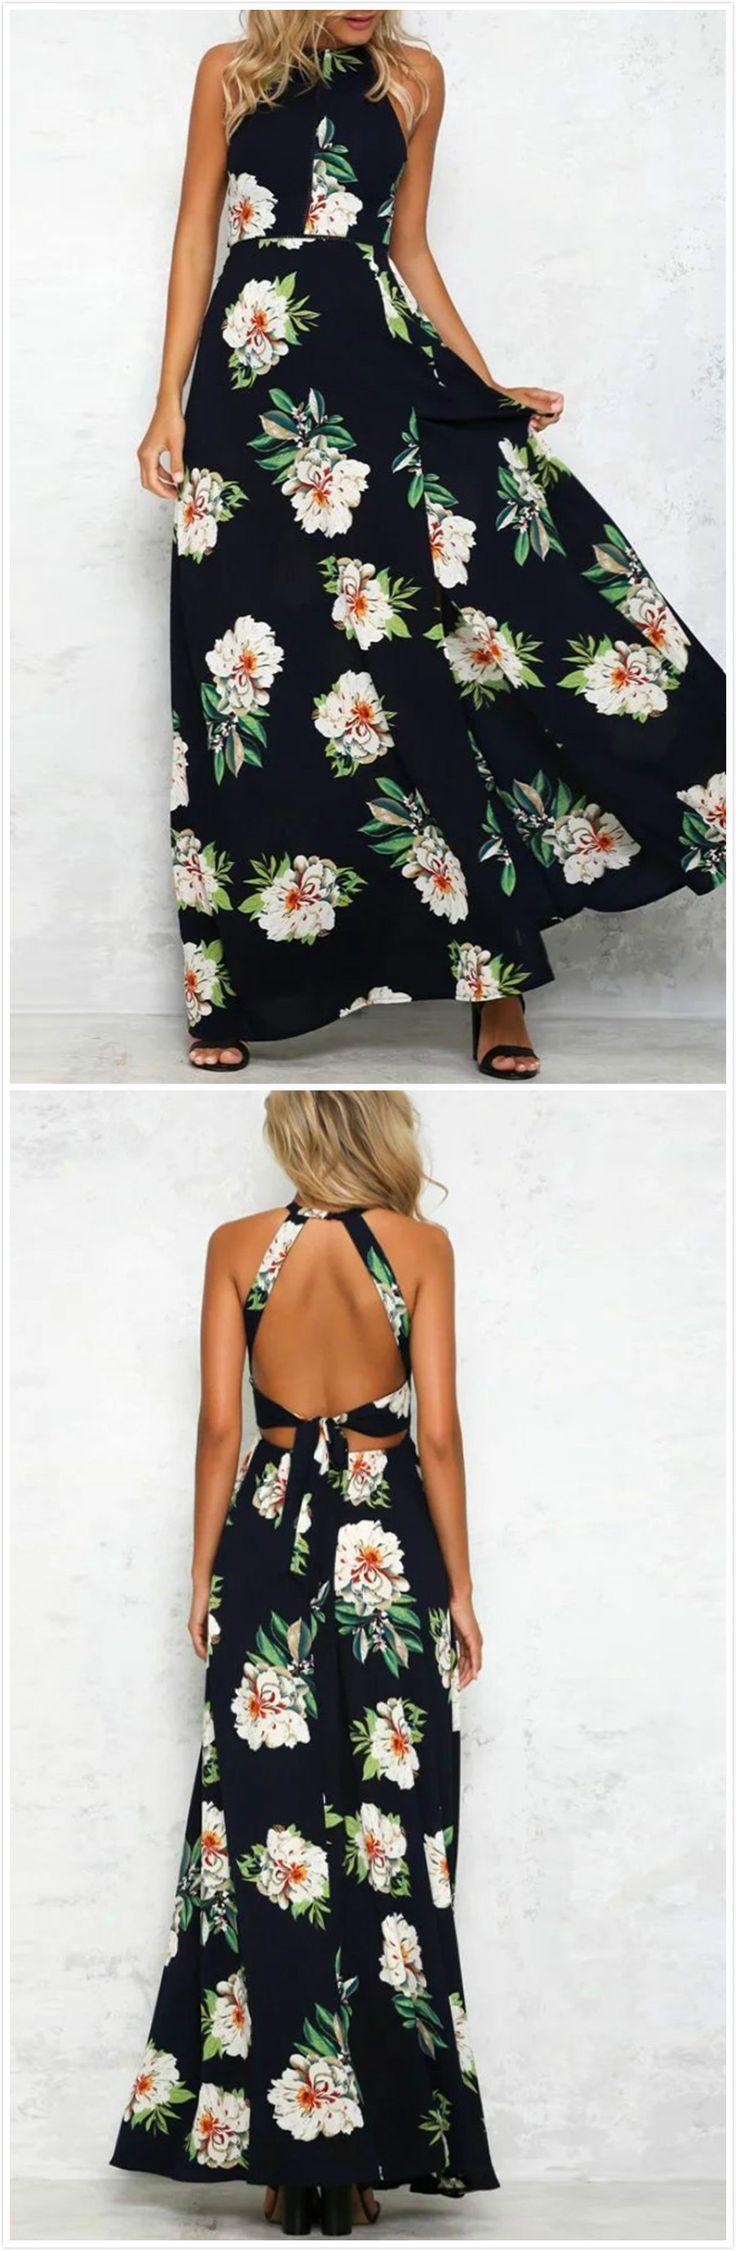 Wedding - Sleeveless Polyester Halter Neck Floral Print Maxi Day Going Out Dress